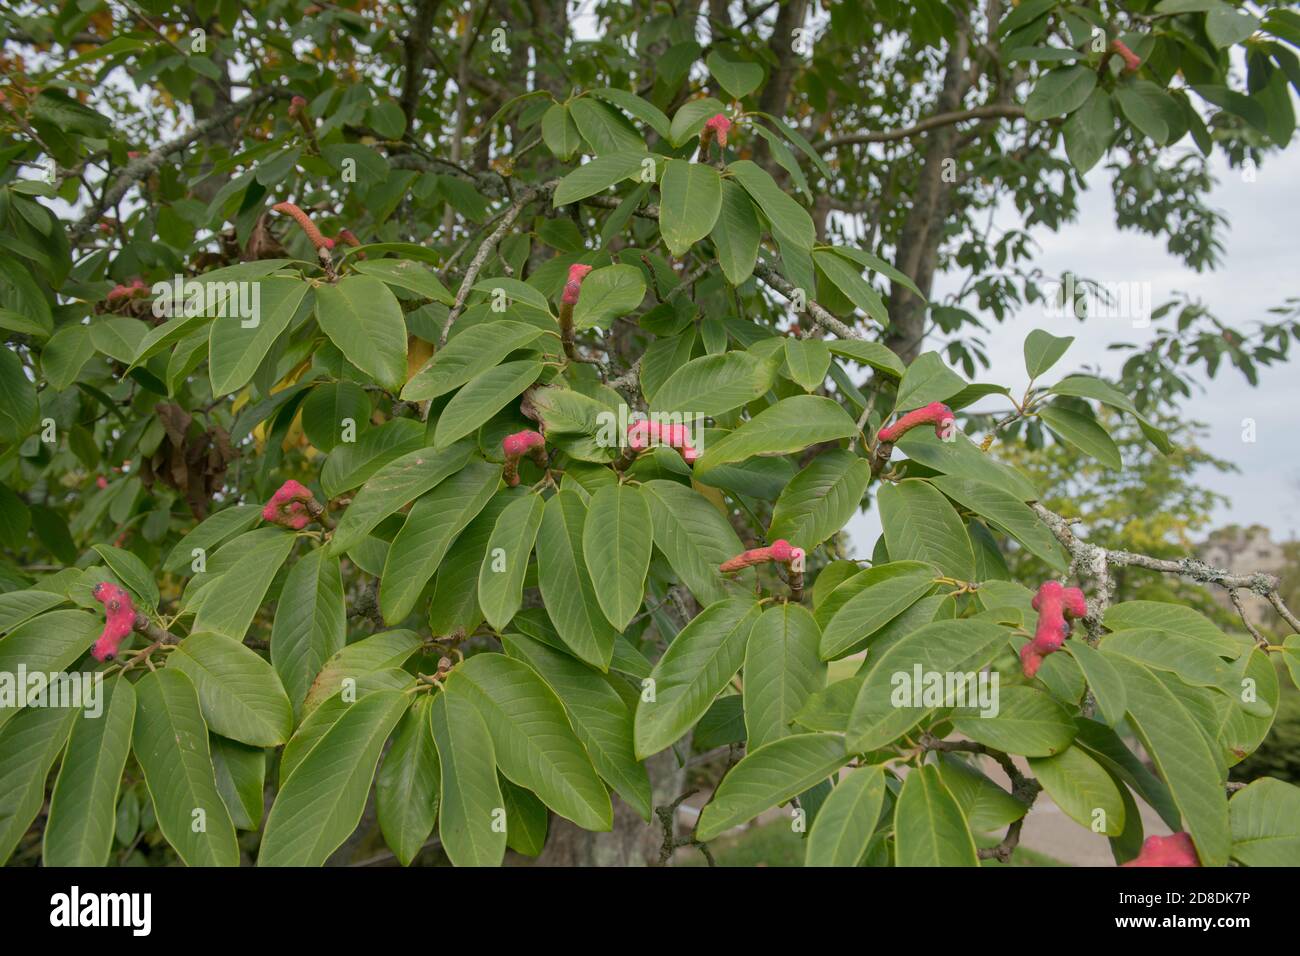 Pink Fruit and Early Autumn Foliage of a Hybrid Campbell's Magnolia Tree (Magnolia Campbell x Campbell var. 'Mollicomata') Growing in a Garden Stock Photo